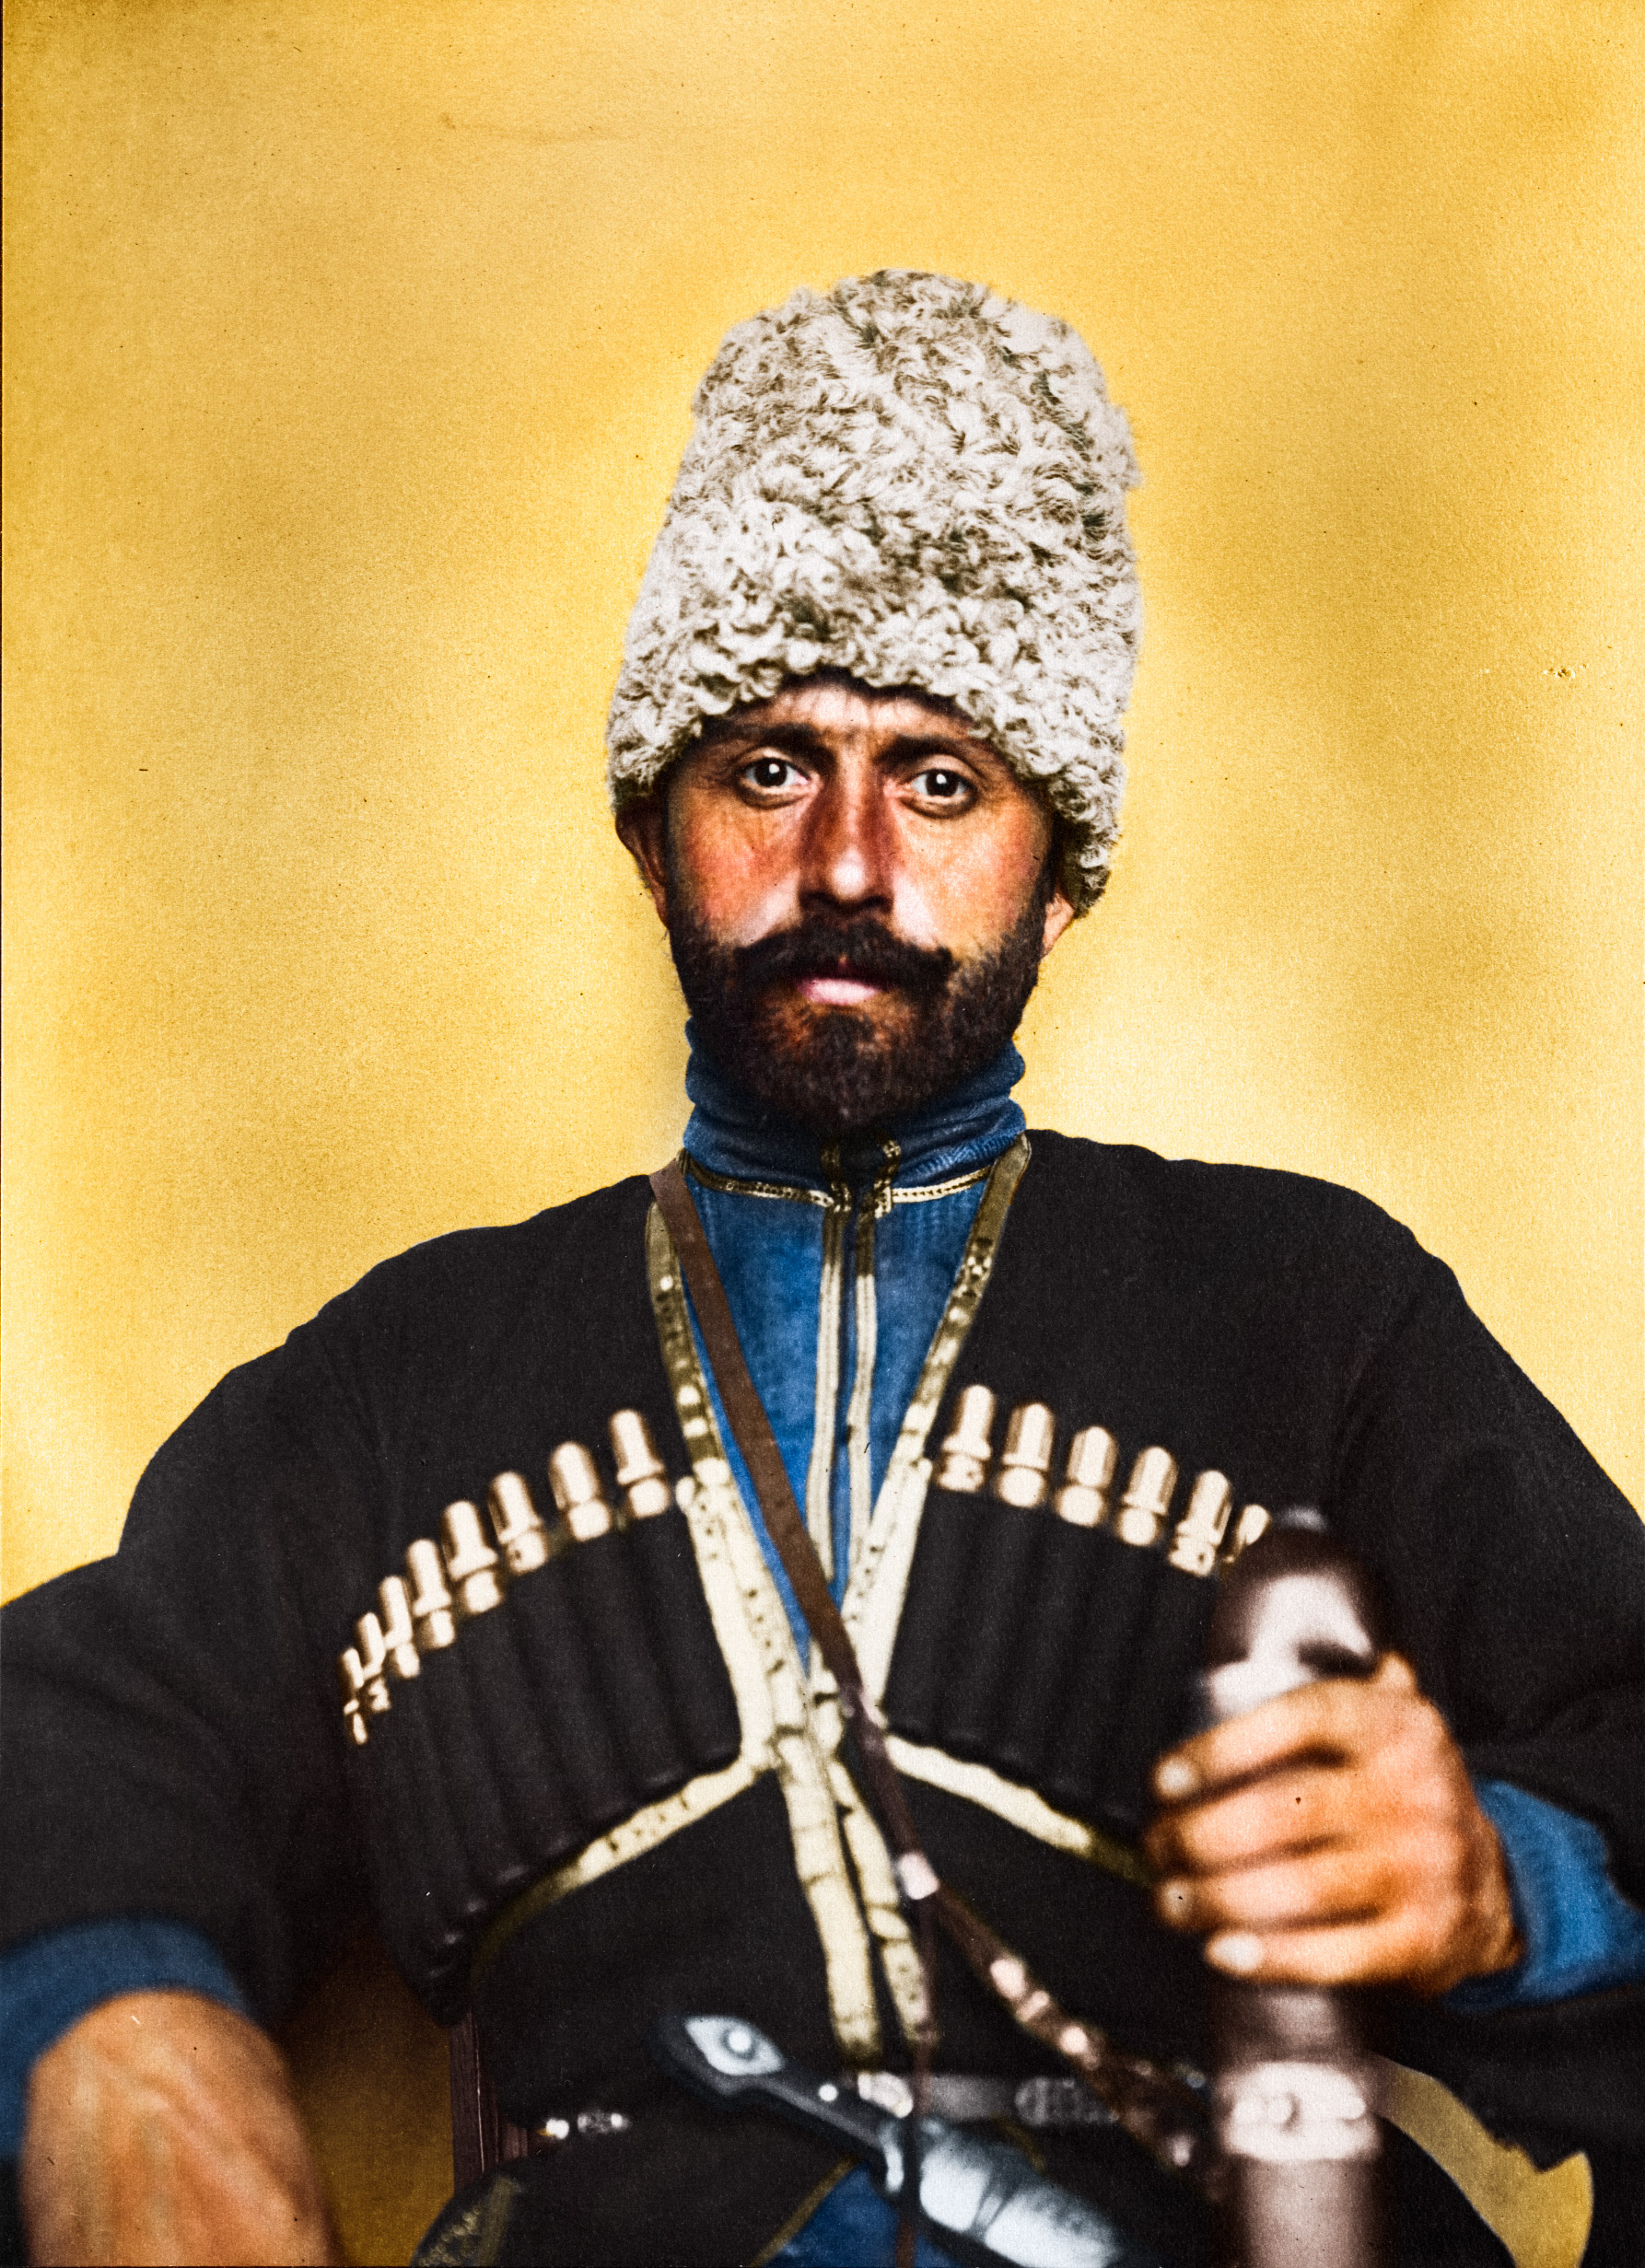 Portrait of a Cossack man from the steppes of Russia at the Ellis Island Immigration Station, circa 1905-1914.